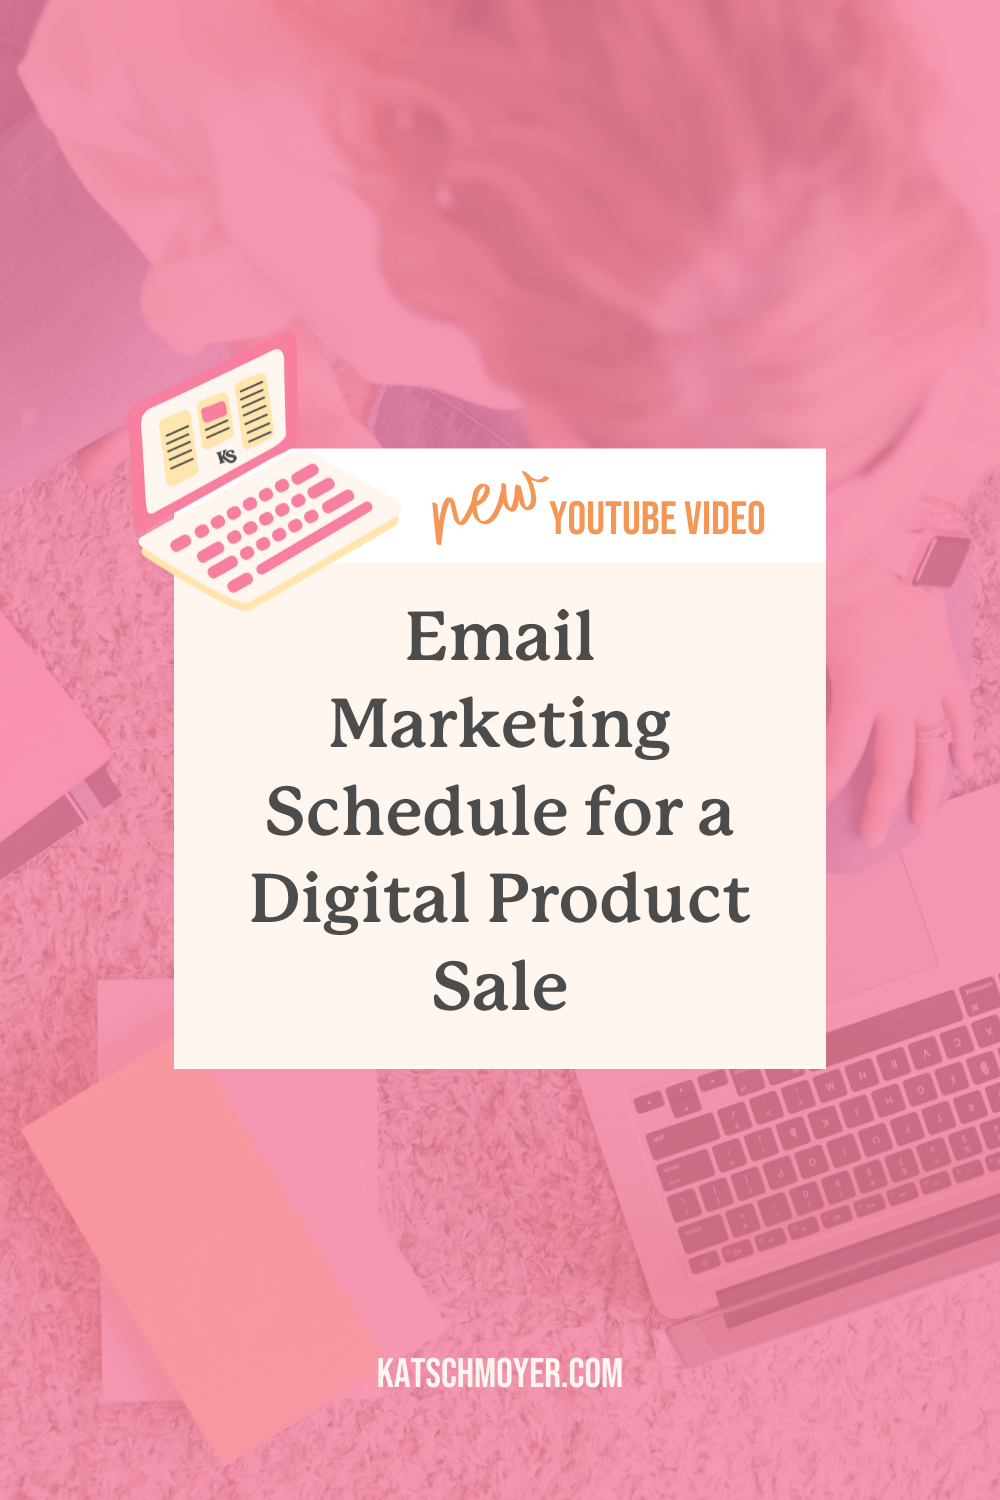 Email Marketing Schedule for a Digital Product Sale